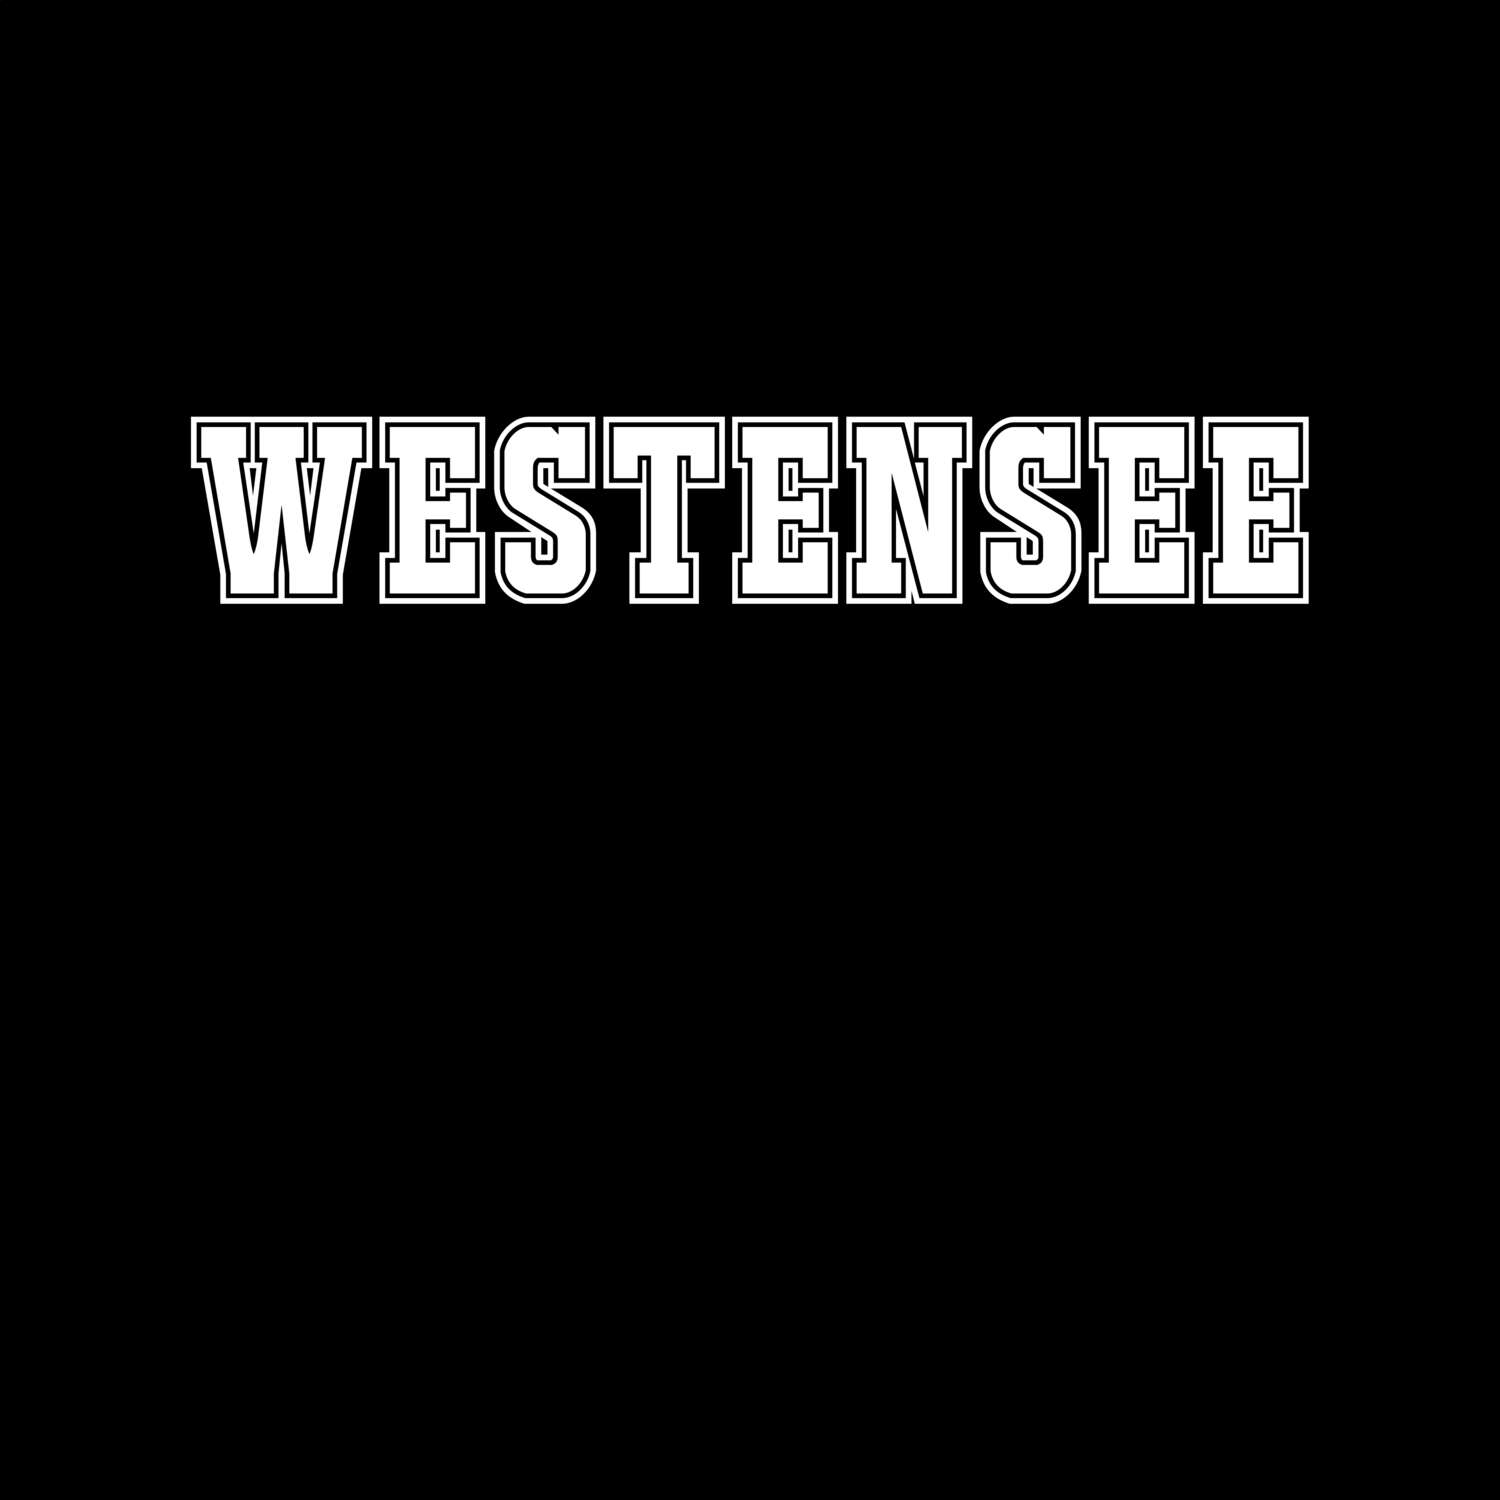 Westensee T-Shirt »Classic«